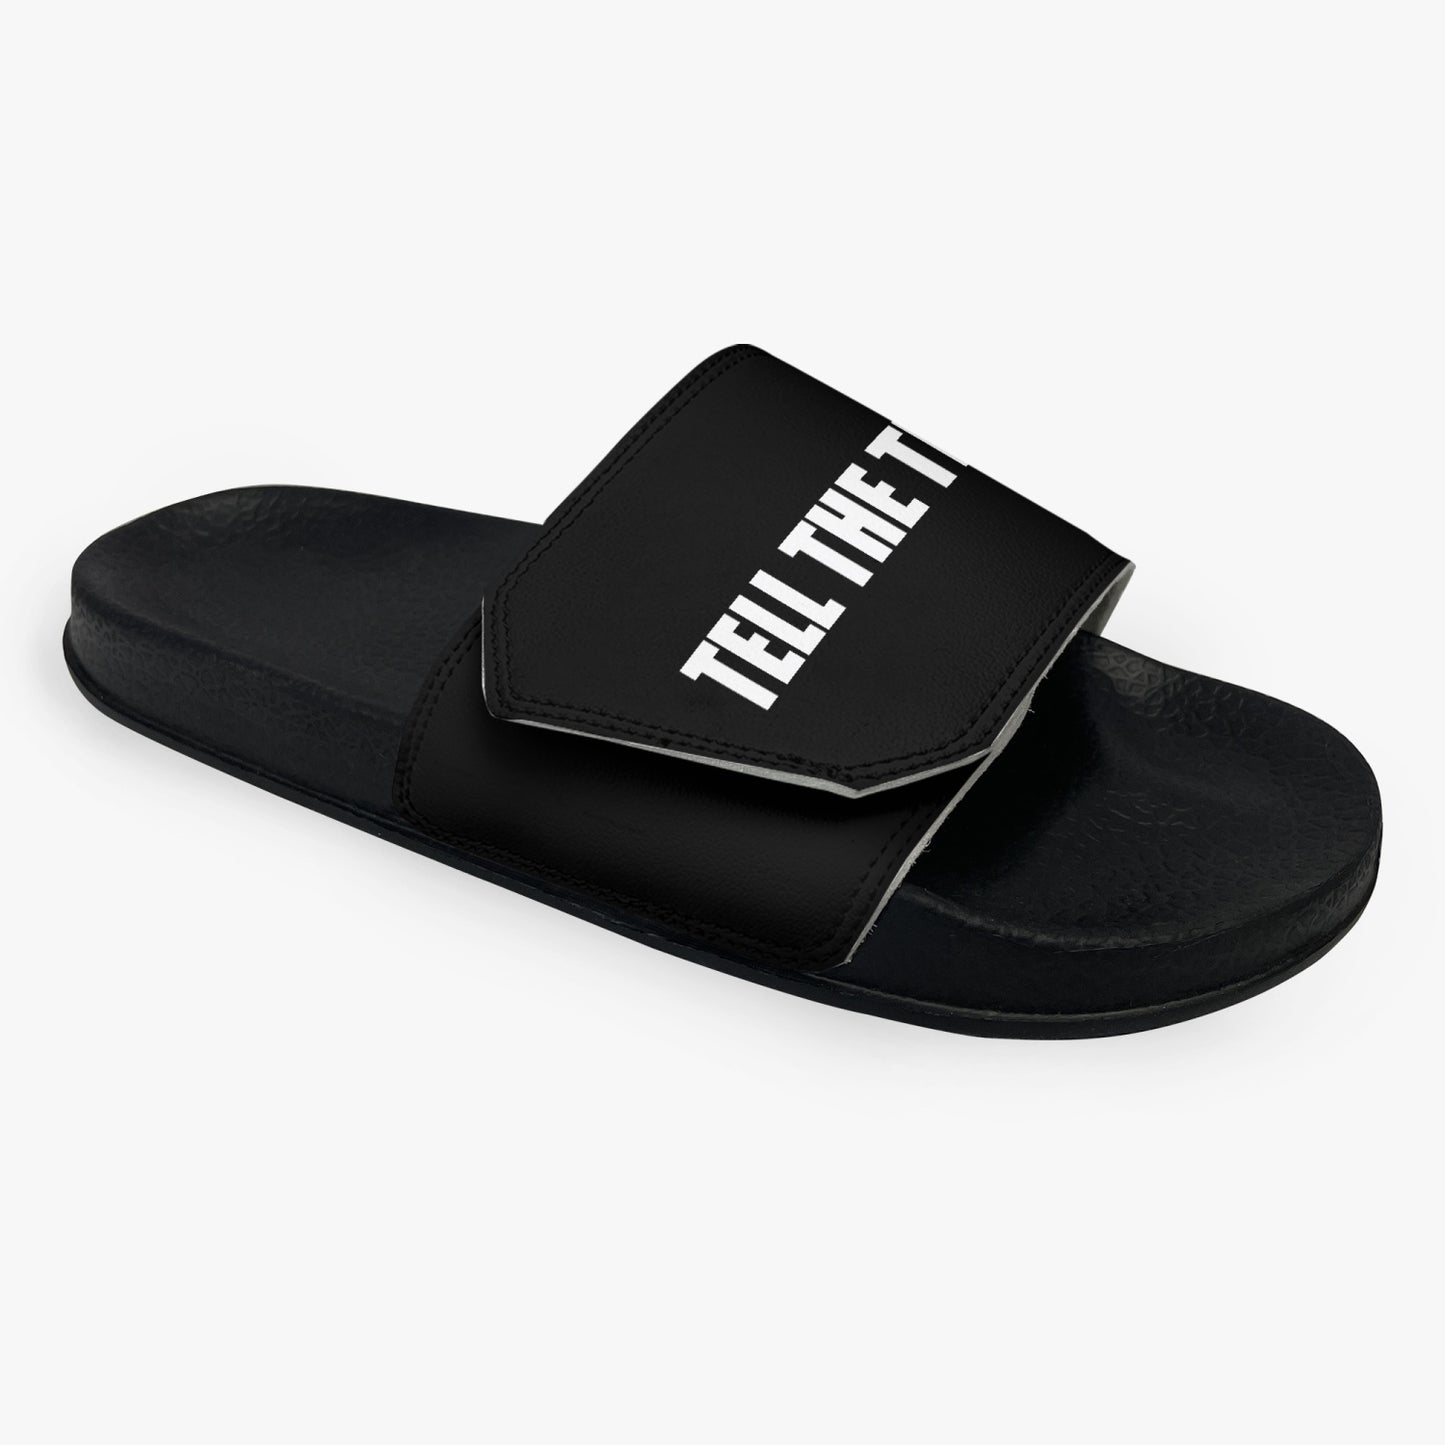 TELL THE TRUTH LEATHER VELCRO SLIDES